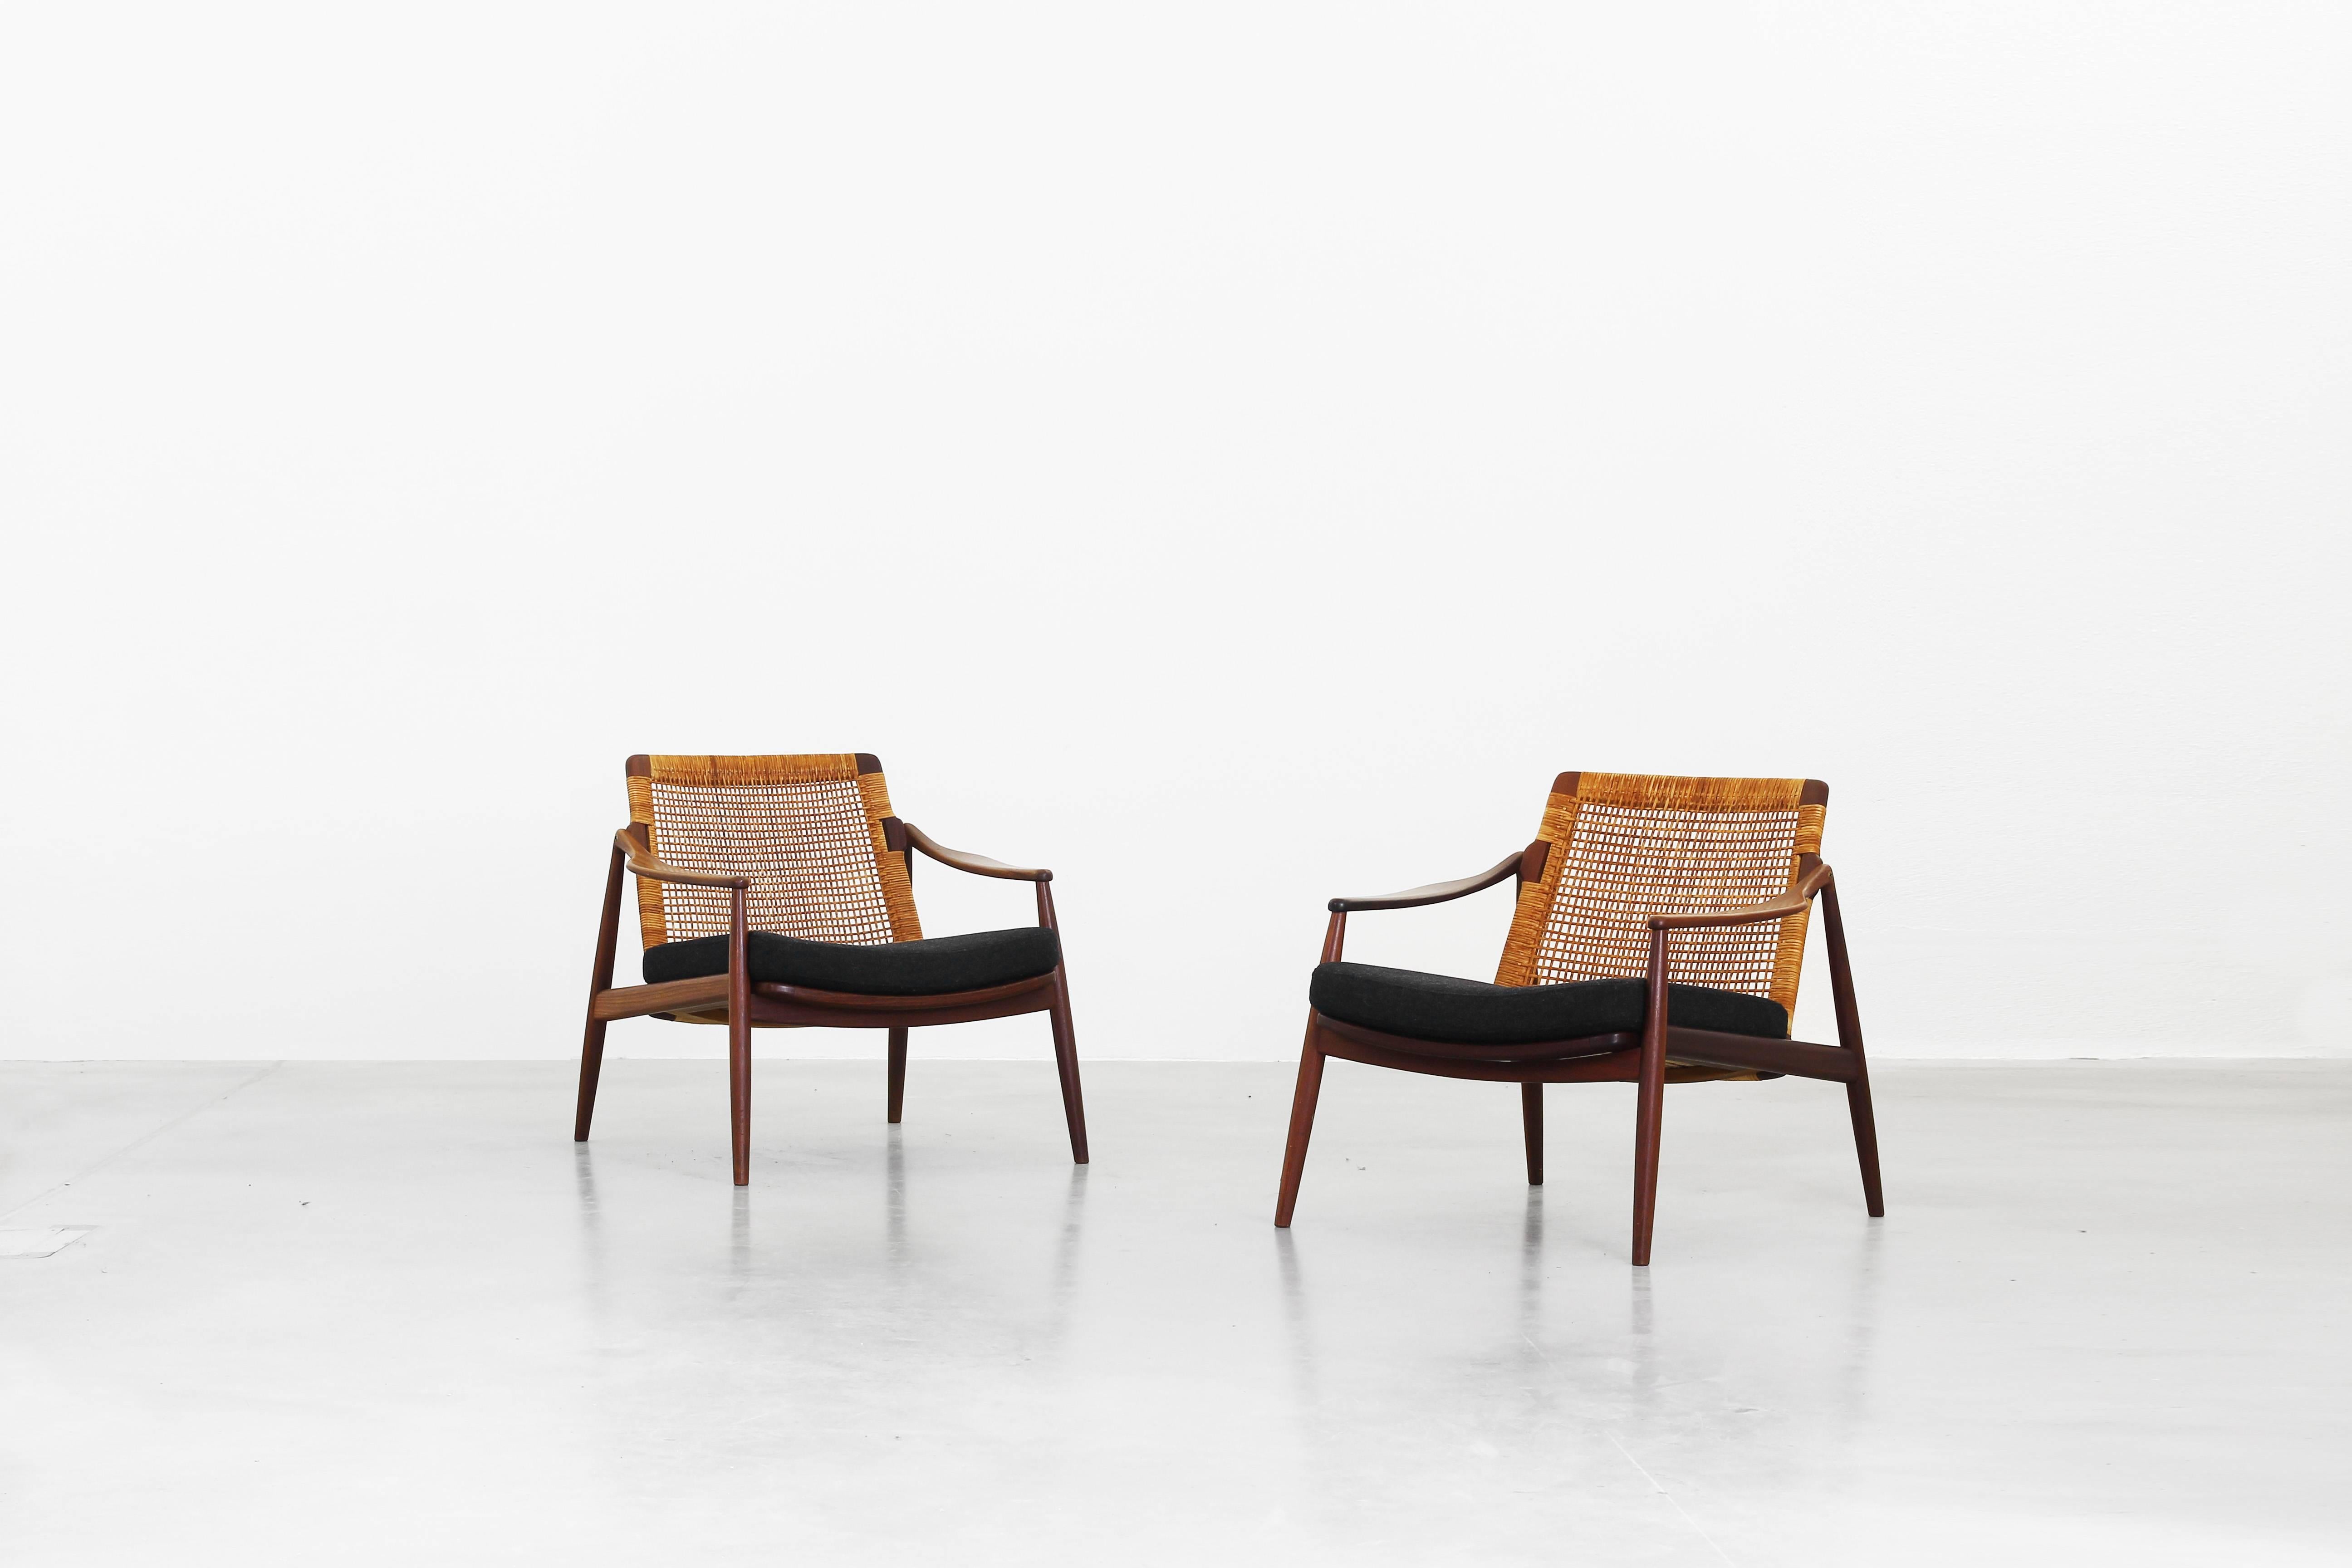 Very beautiful lounge chairs designed by Hartmut Lohmeyer for Wilkhahn in the 1950s, made in Germany. Very beautifully shaped, newly reupholstered with a high quality fabric by Kvadrat in dark grey, the cane and the teakwood frame are in an